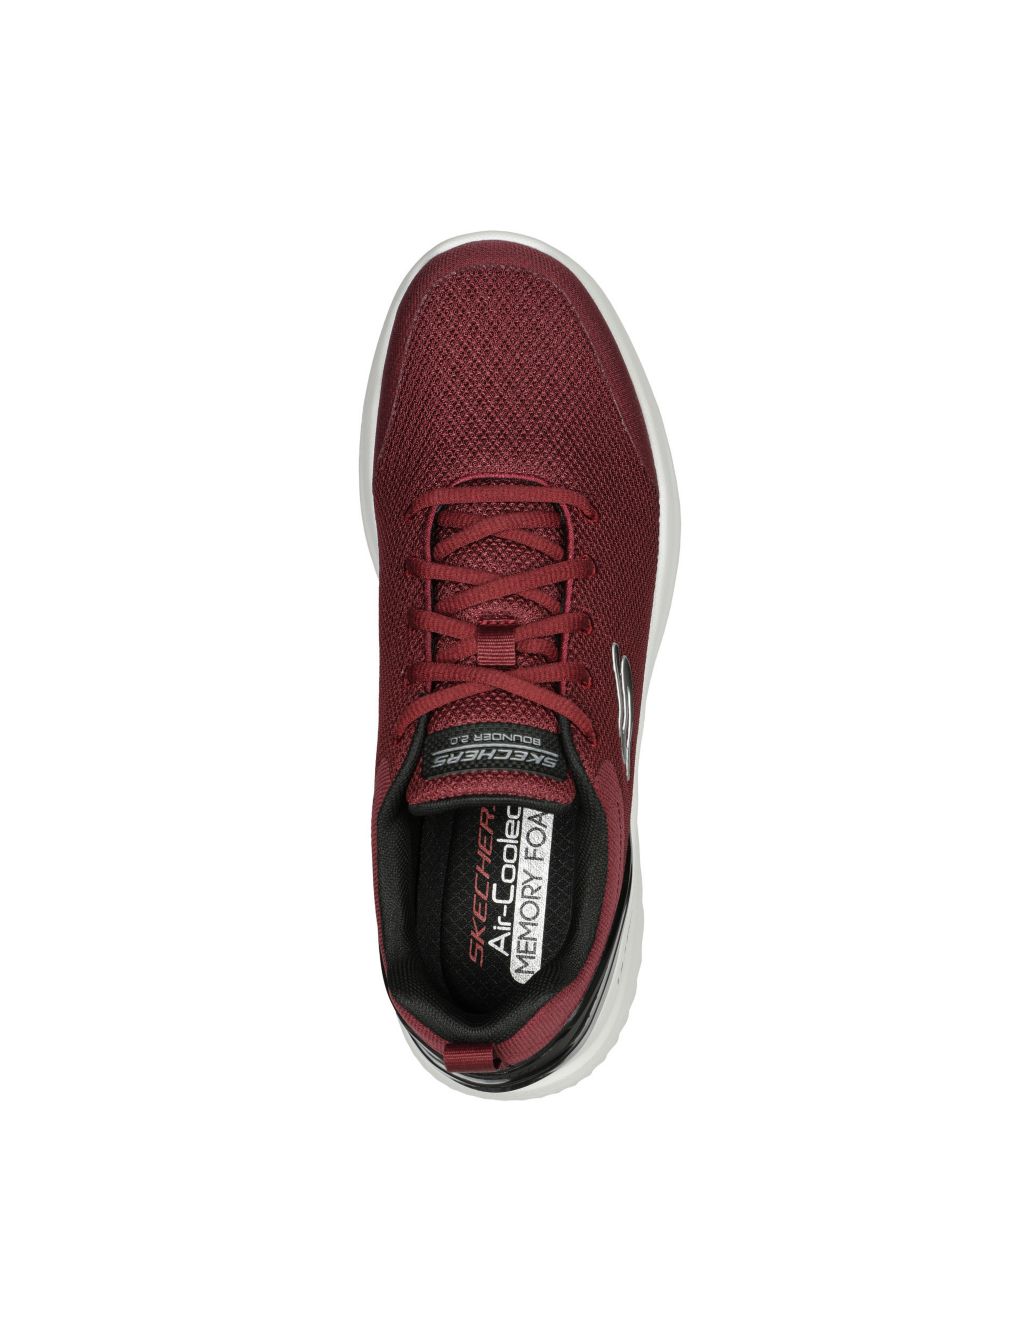 Bounder 2.0 Nasher Lace Up Trainers image 3